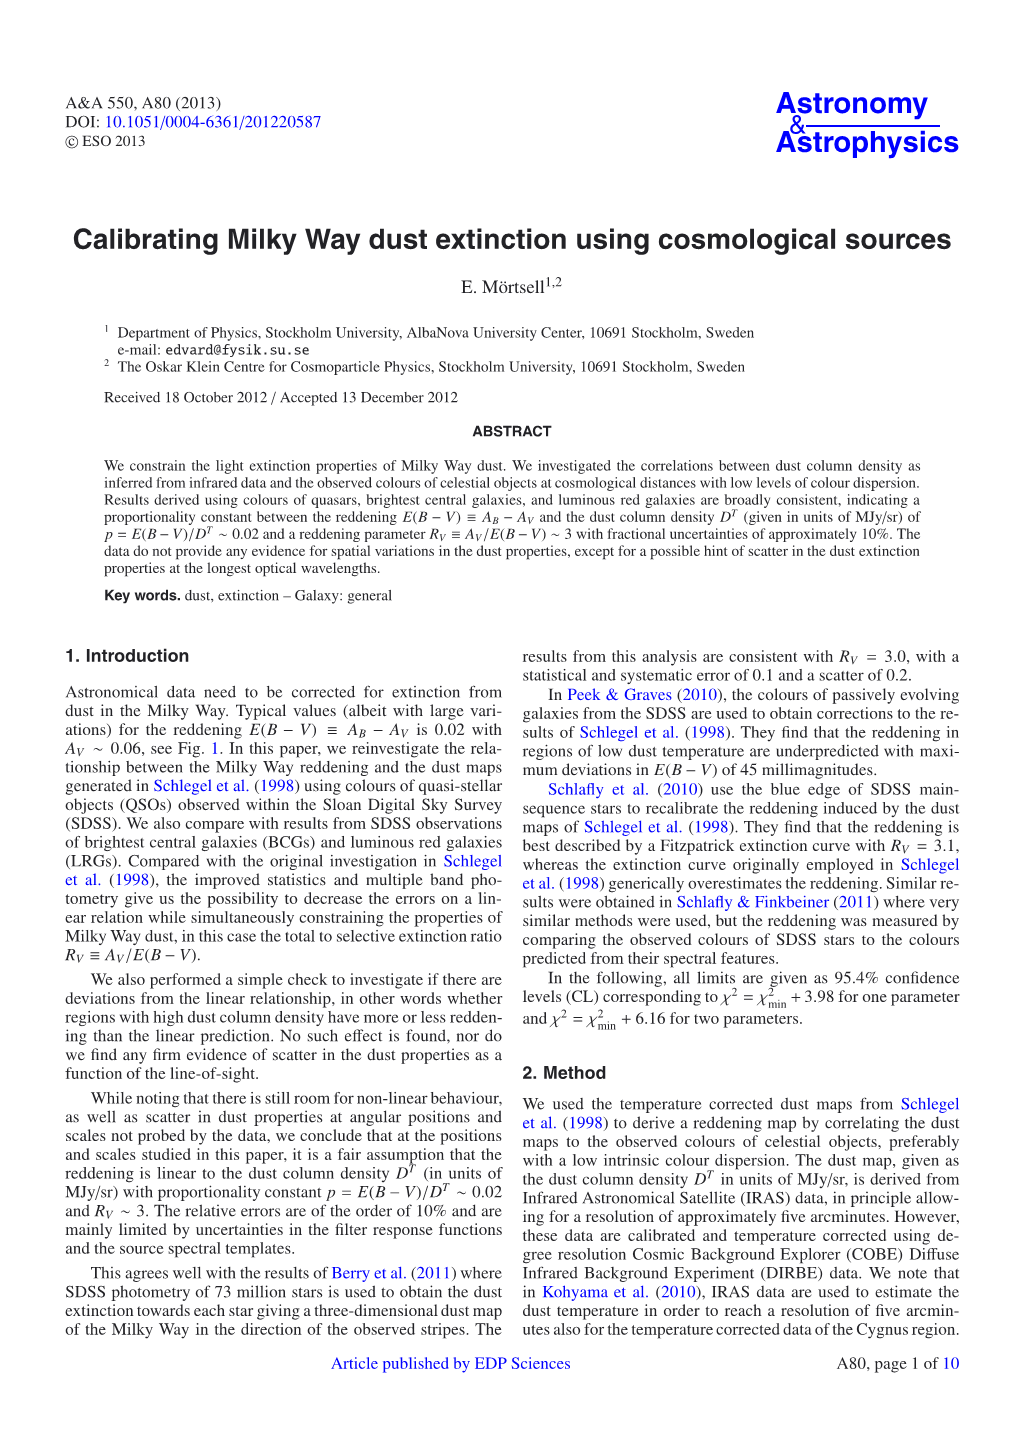 Calibrating Milky Way Dust Extinction Using Cosmological Sources